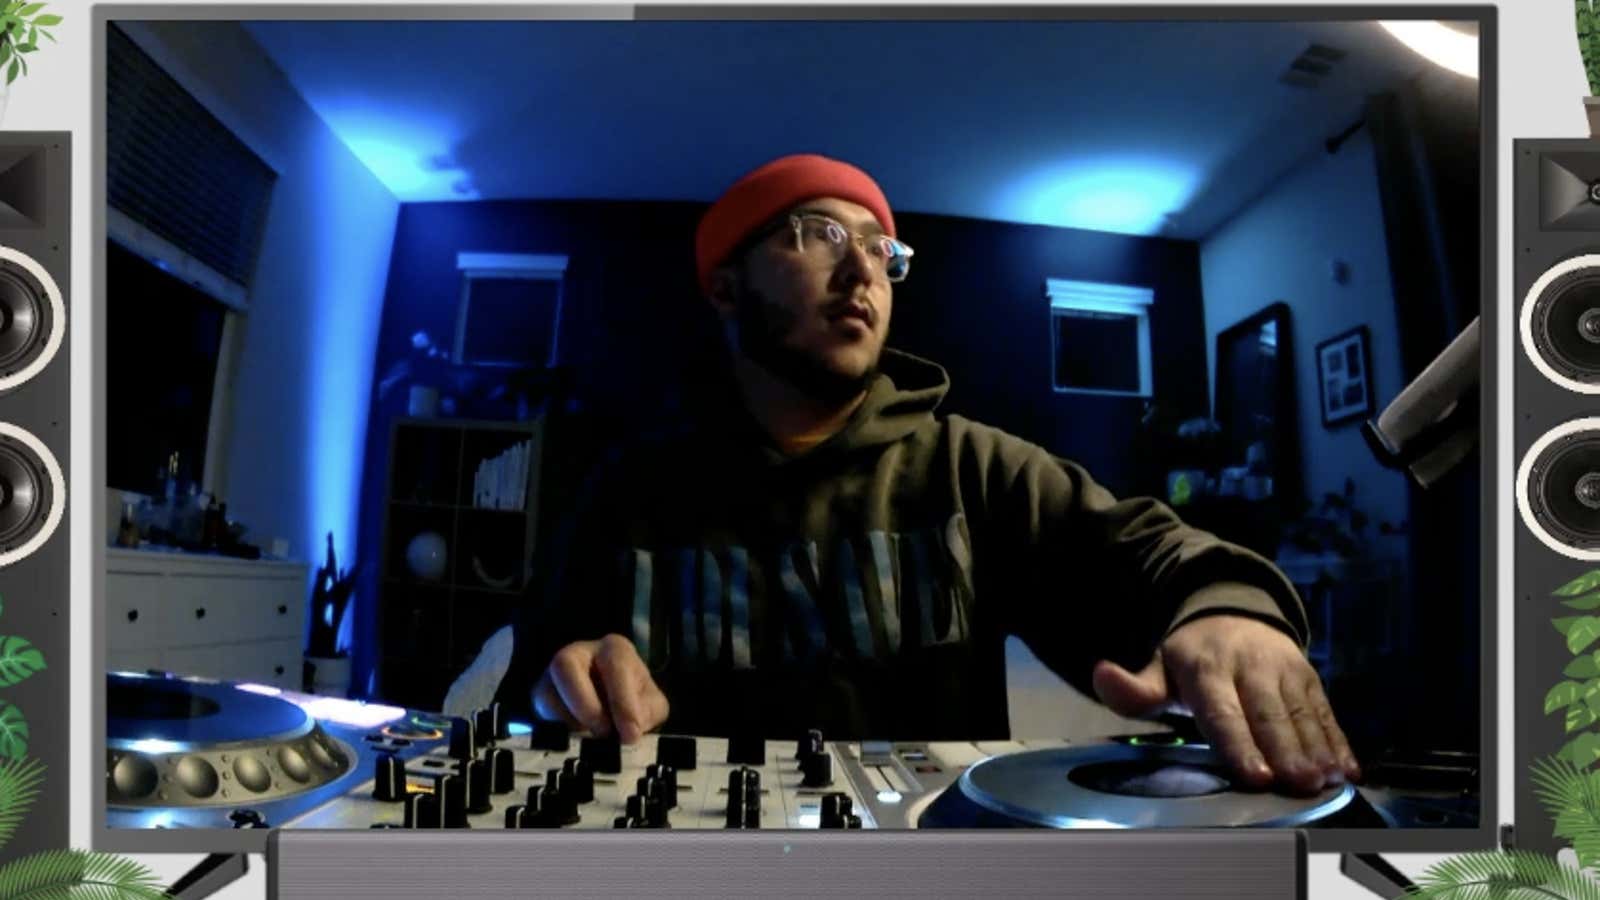 A HashiCorp employee DJs an online coffeehouse gathering.